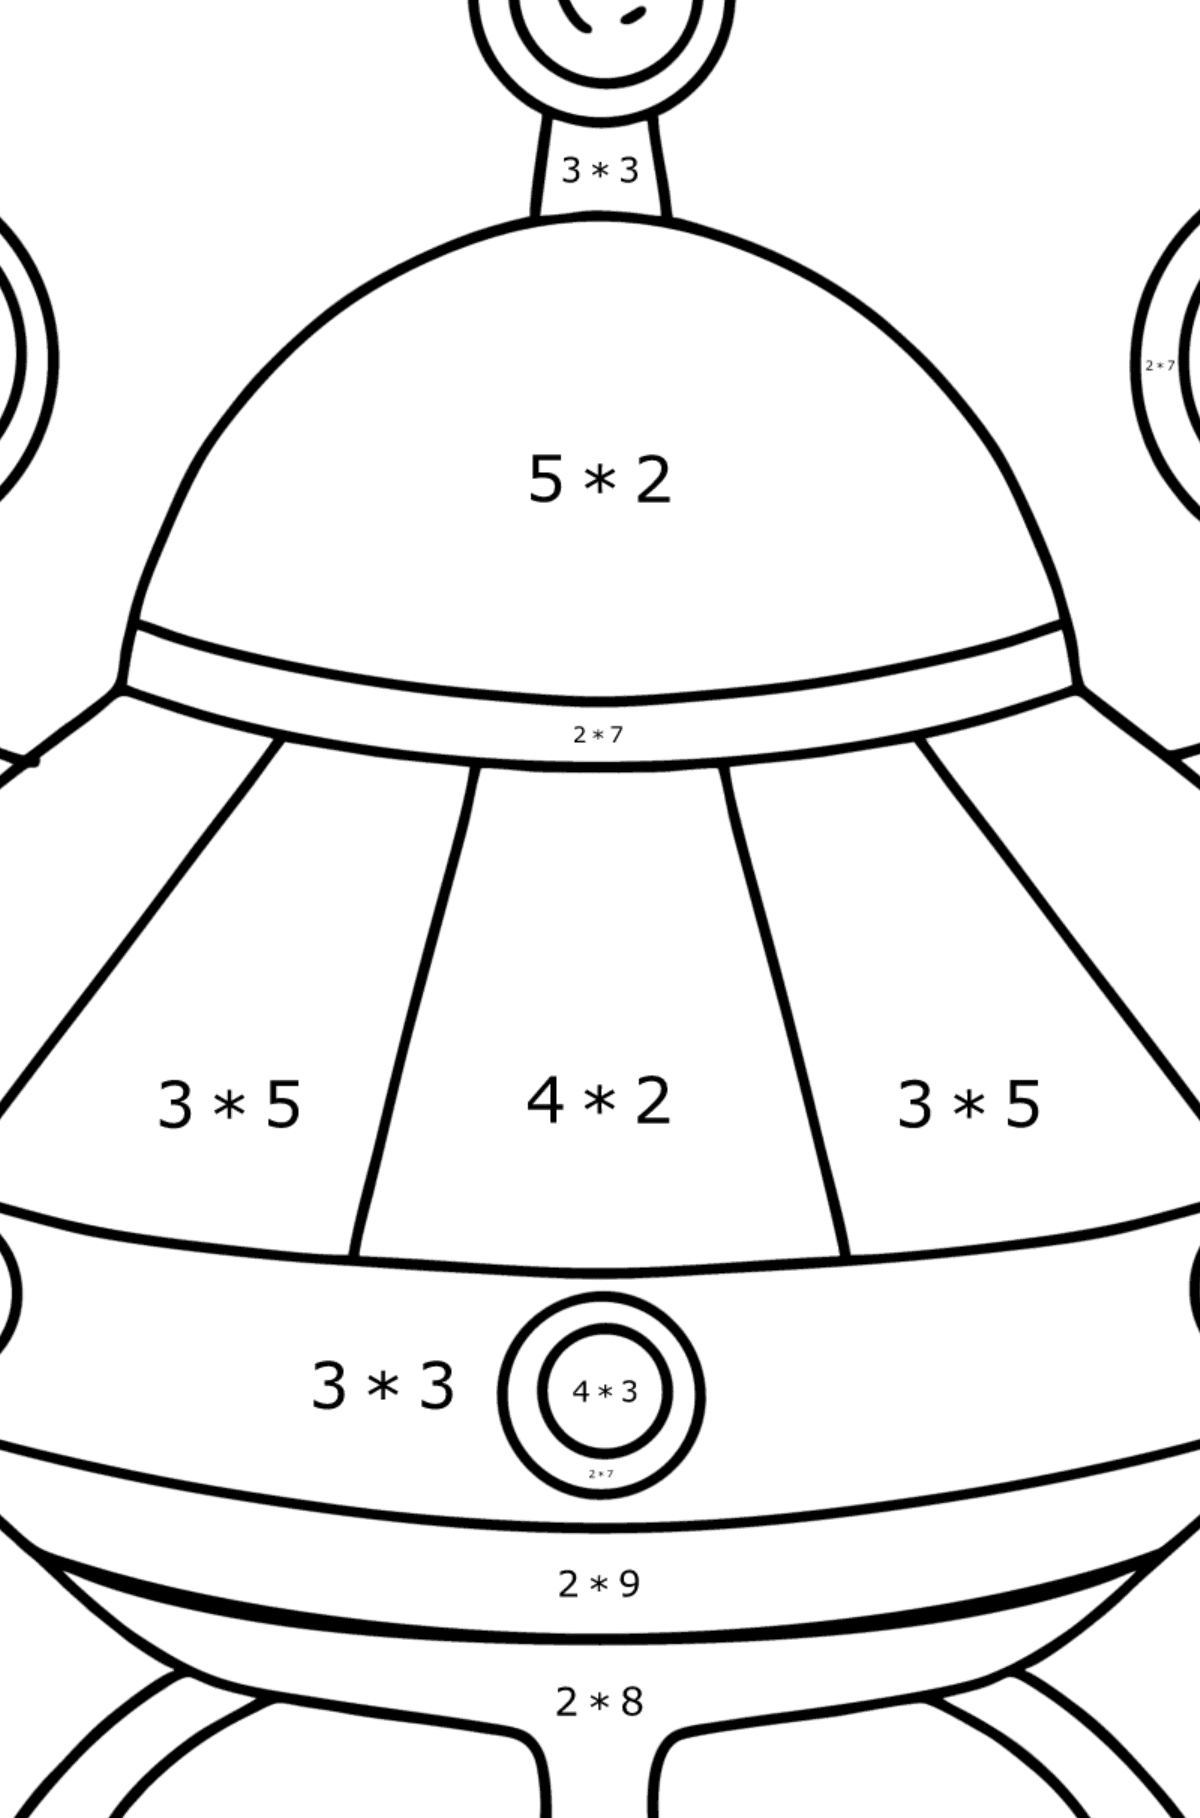 Alien spaceship coloring pages - Math Coloring - Multiplication for Kids